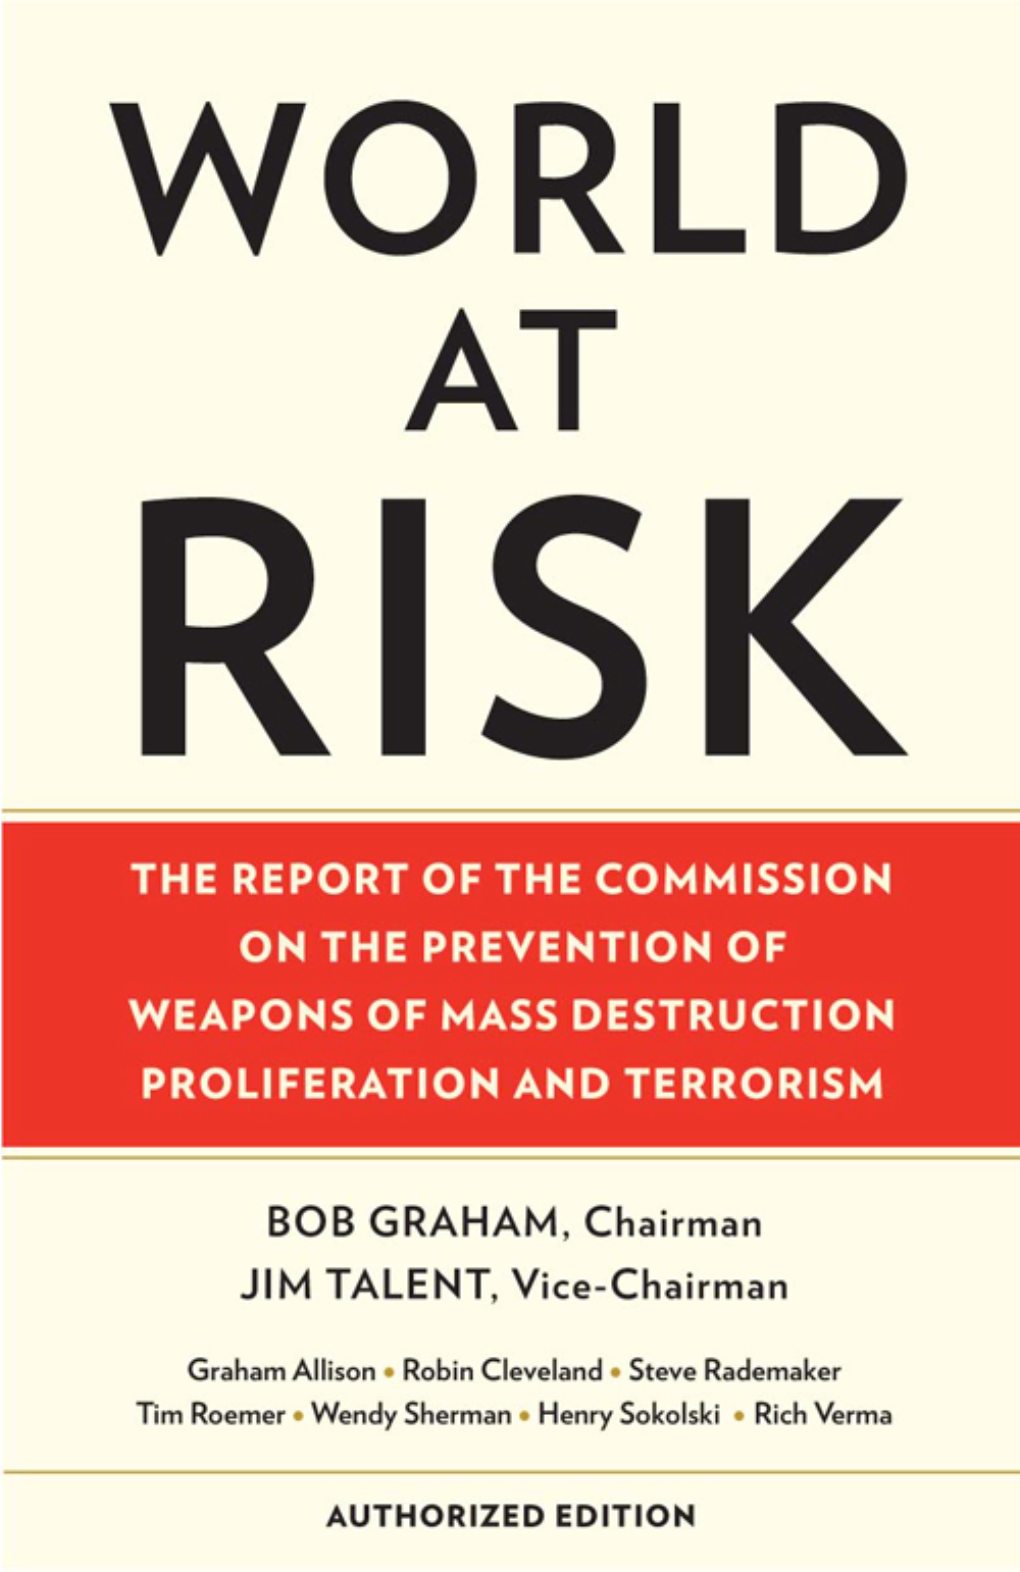 WORLD at RISK the Report of the Commission on the Prevention of WMD Proliferation and Terrorism